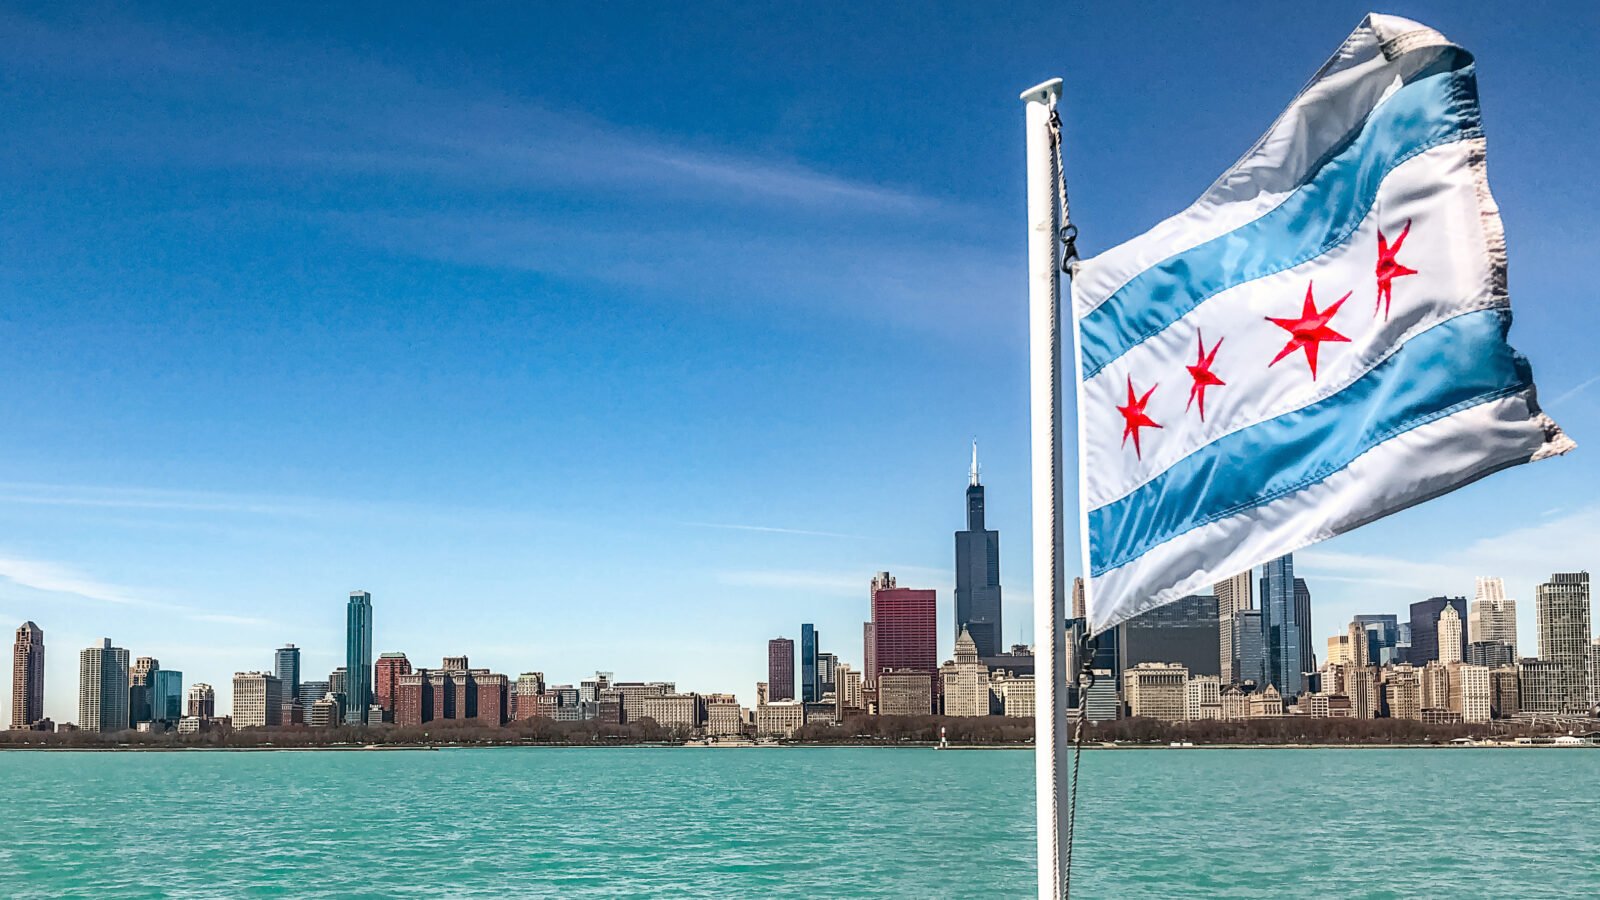 a chicago flag billowing in the wind, with a sunny view of the chicago skyline in the background